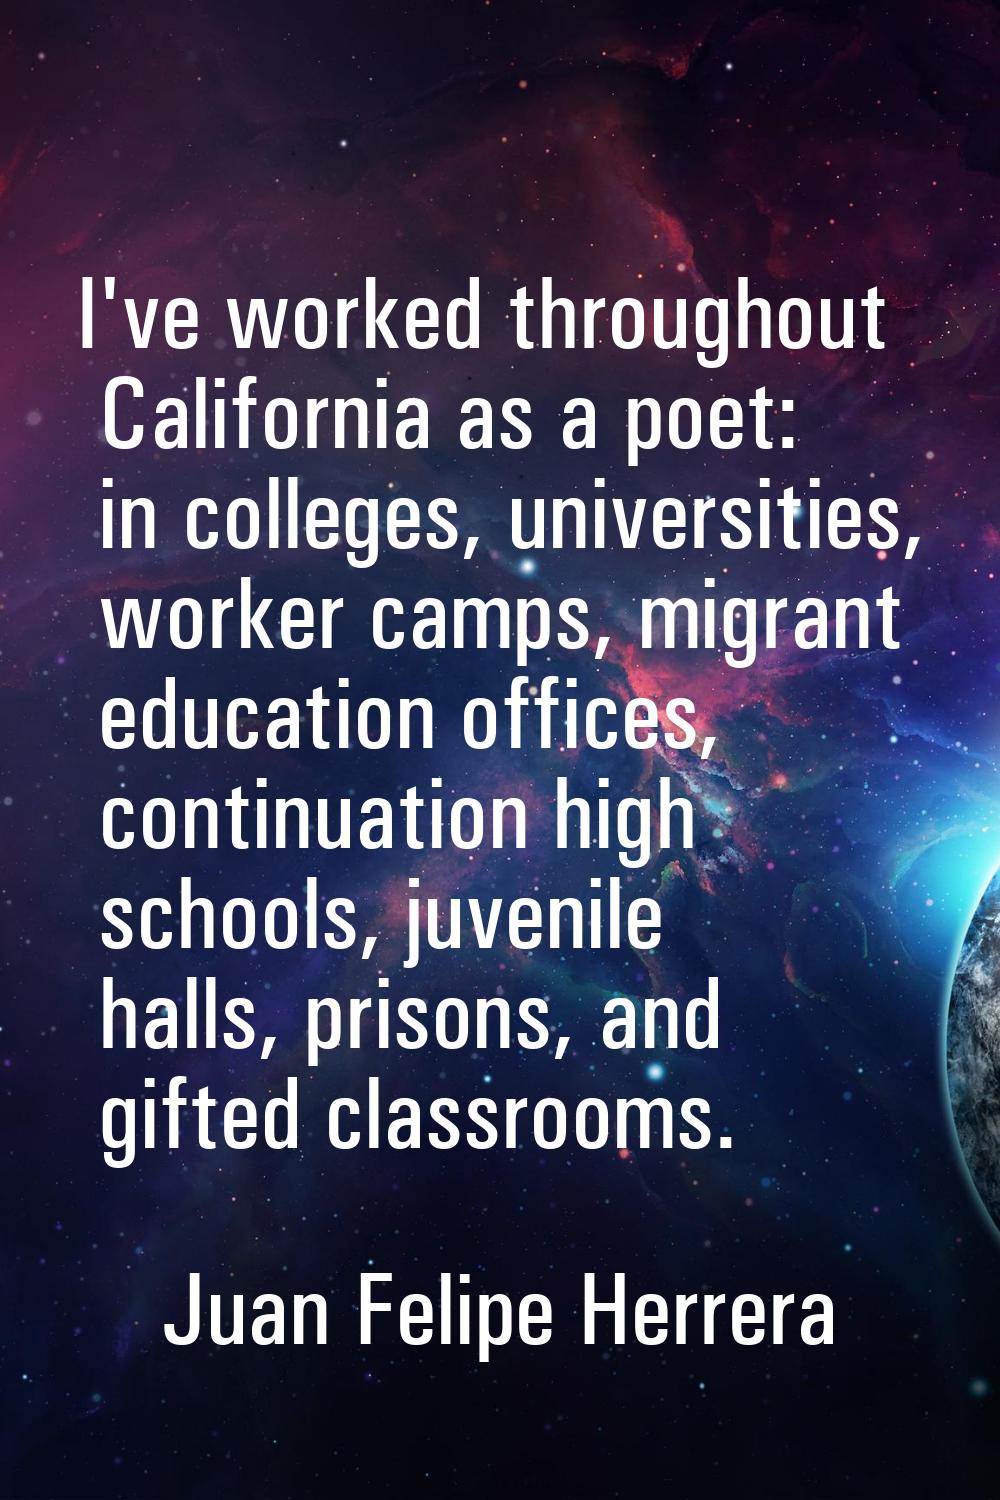 I've worked throughout California as a poet: in colleges, universities, worker camps, migrant educa